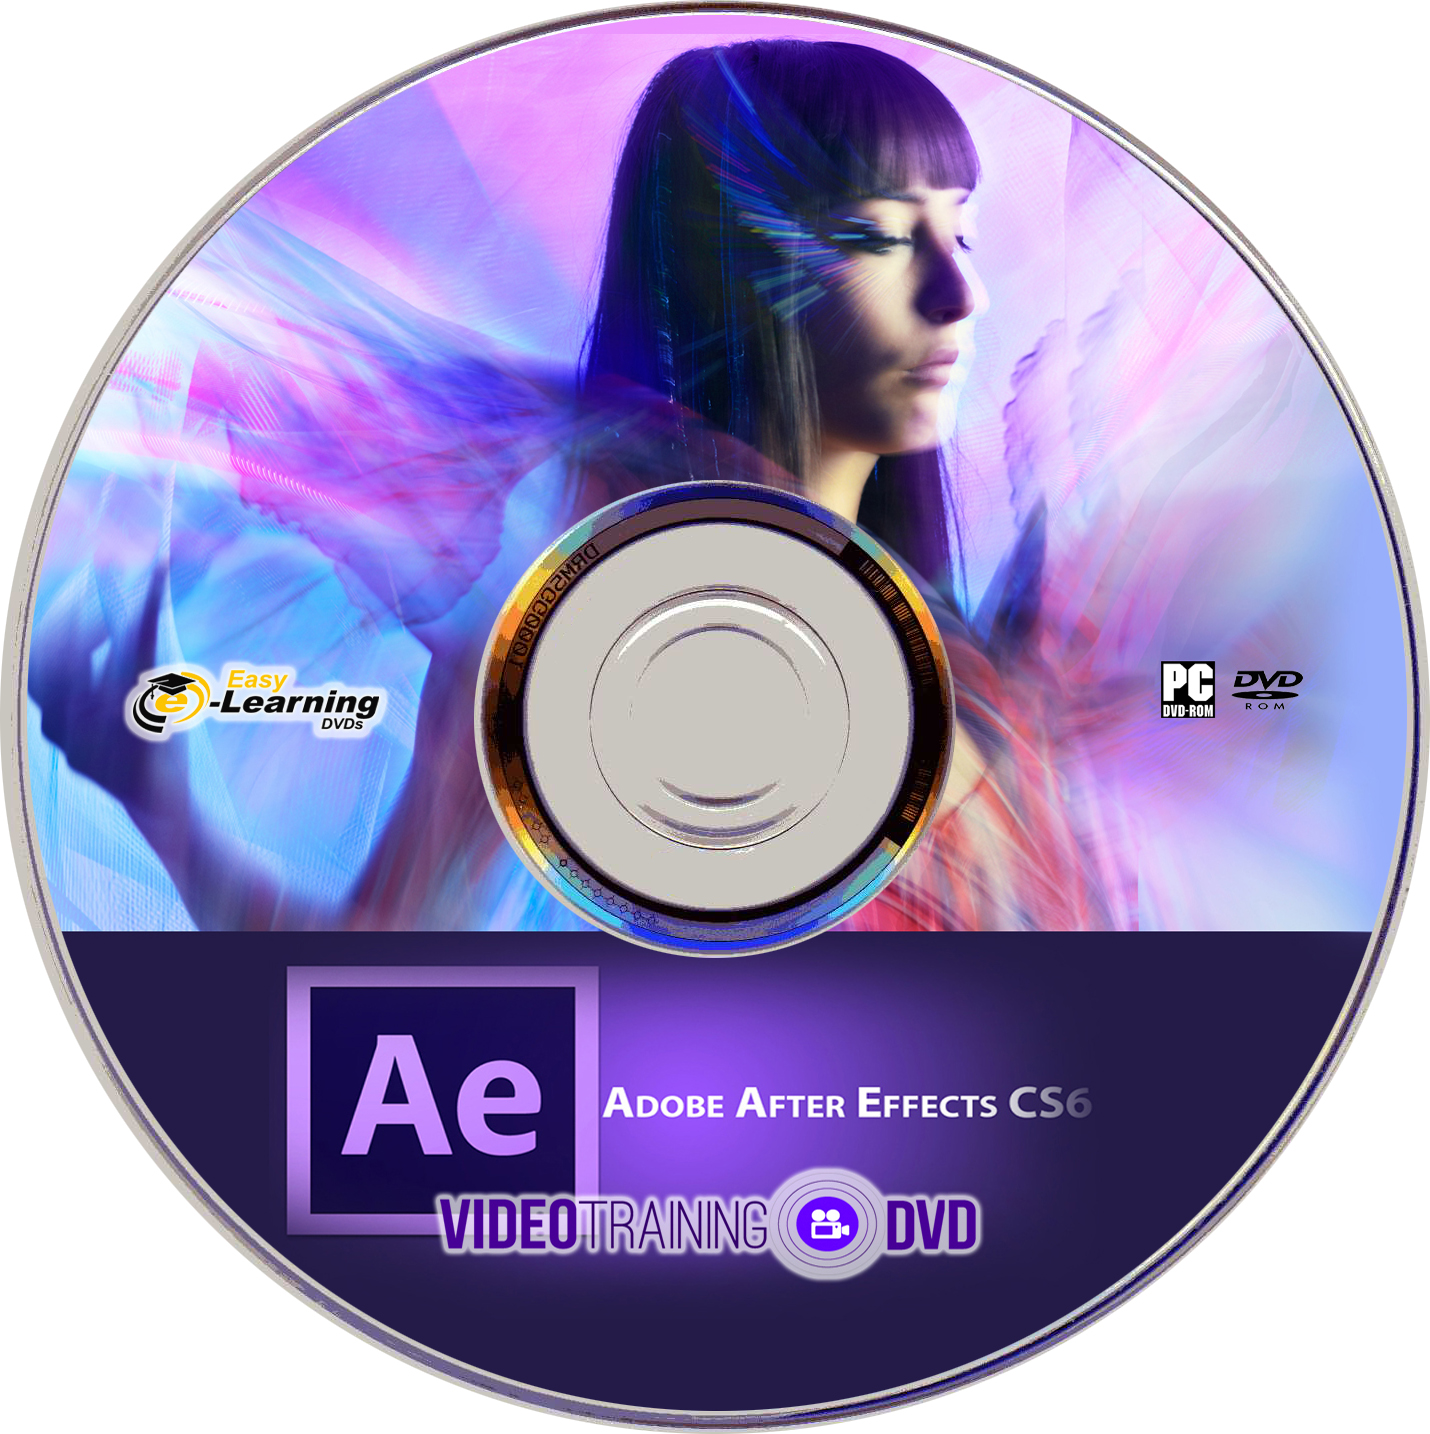 adobe after effects cs6 book free download